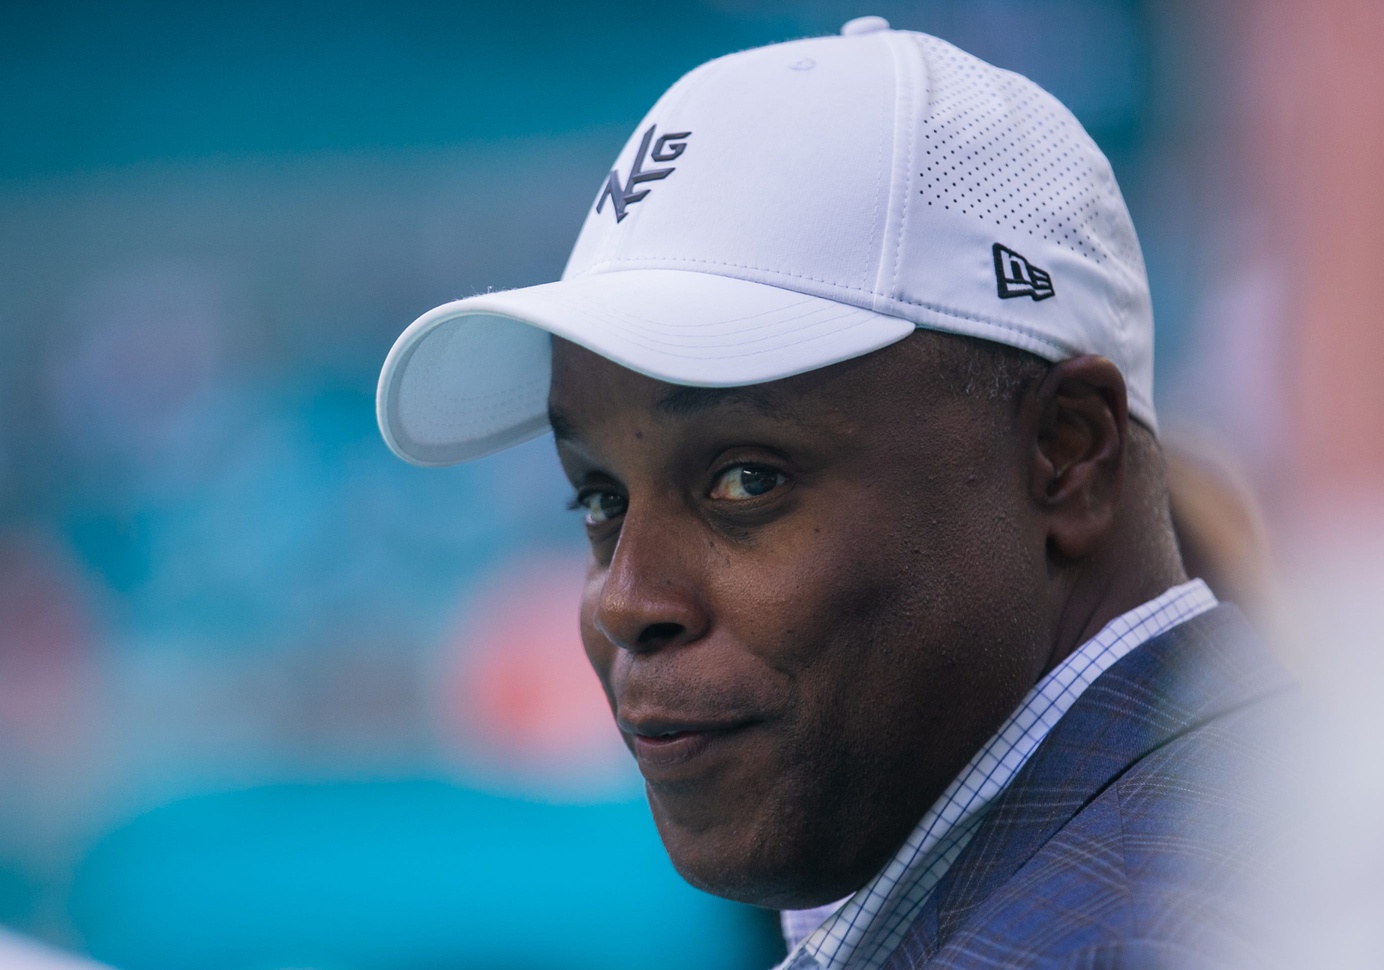 Miami Dolphins General Manager Chris Grier is seen on the sidelines prior to the start of the football game between the New York Jets and host Miami Dolphins at Hard Rock Stadium on Sunday, January 8, 2023, in Miami Gardens, FL.